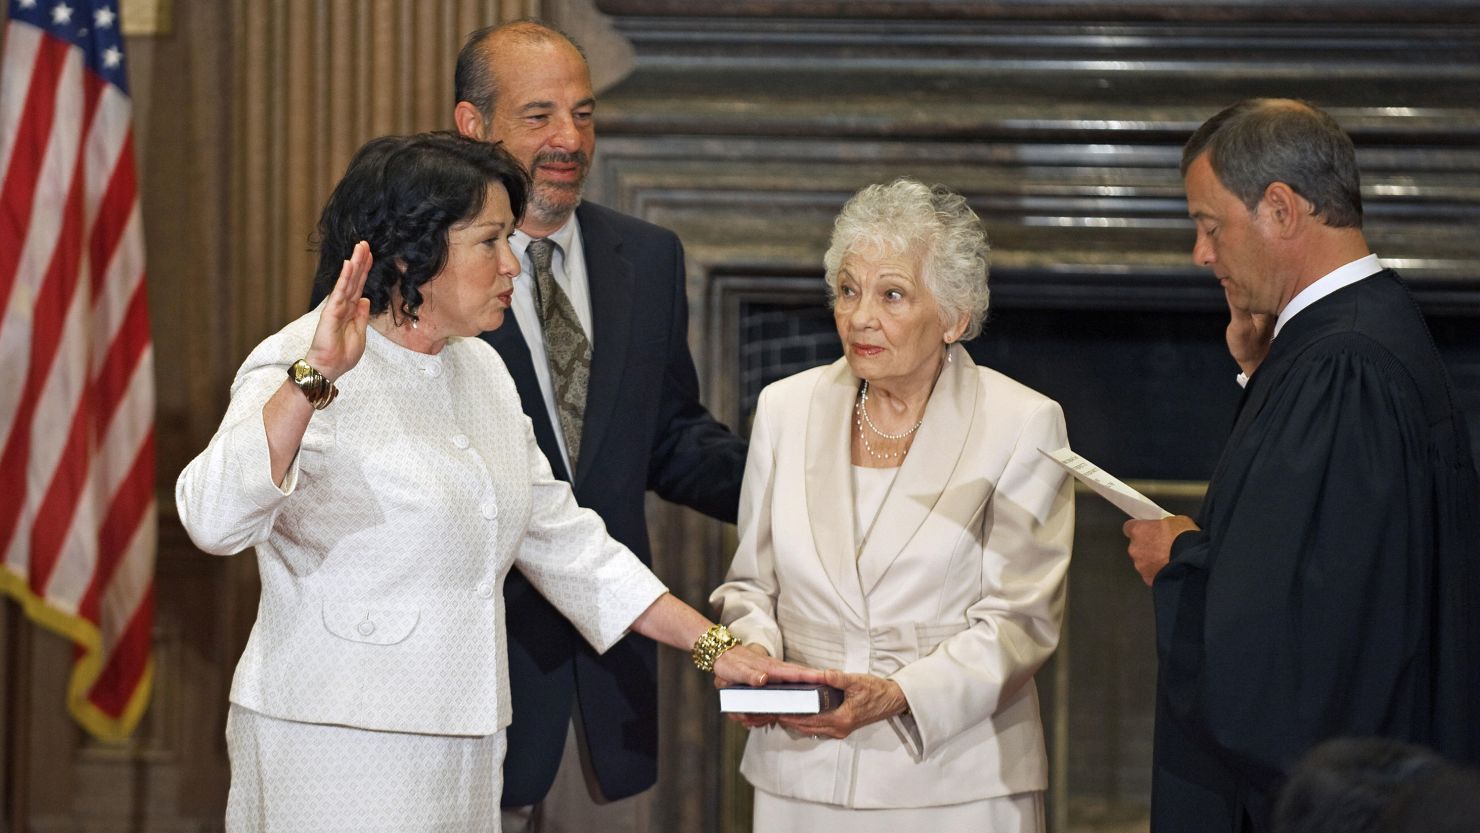 Judge Sonia Sotomayor is sworn in to the Supreme Court on August 8, 2009, by Chief Justice John Roberts as her mother Celina holds the Bible and her brother Juan Luis looks on.